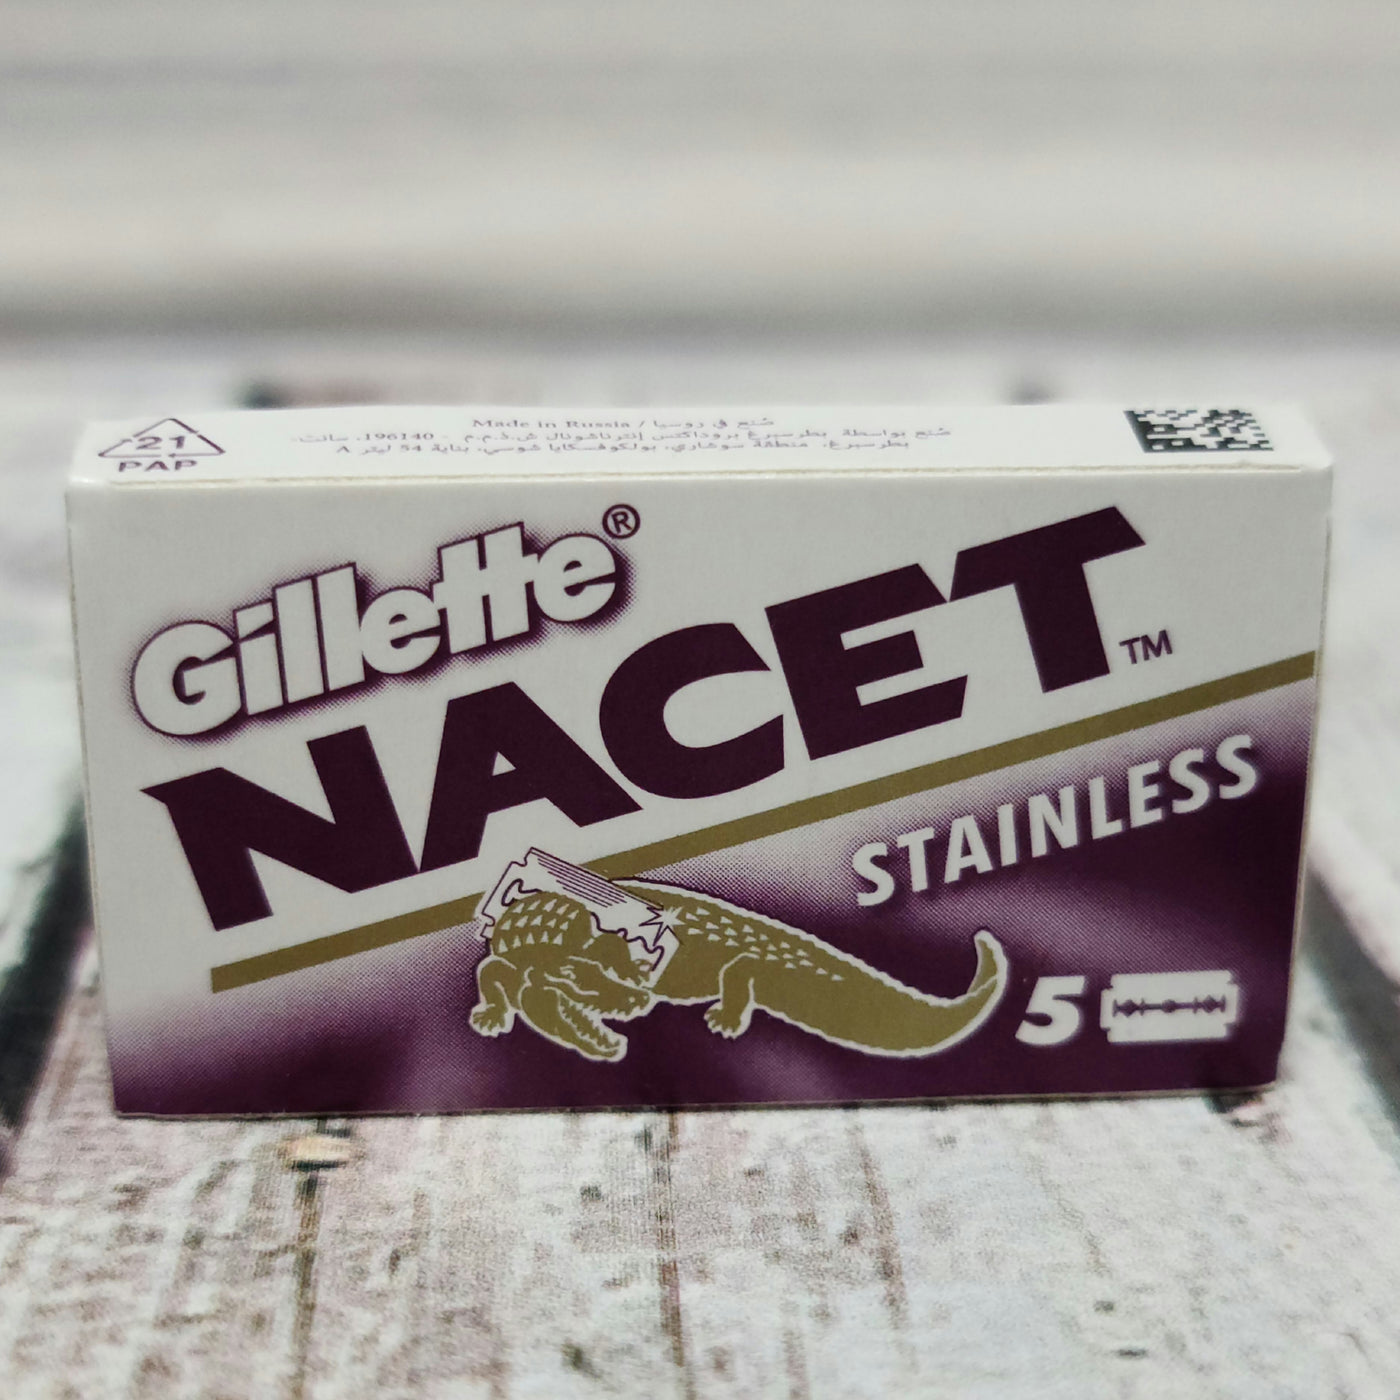 Nacet Stainless Double Edge Safety Razor Blades - 5 pack